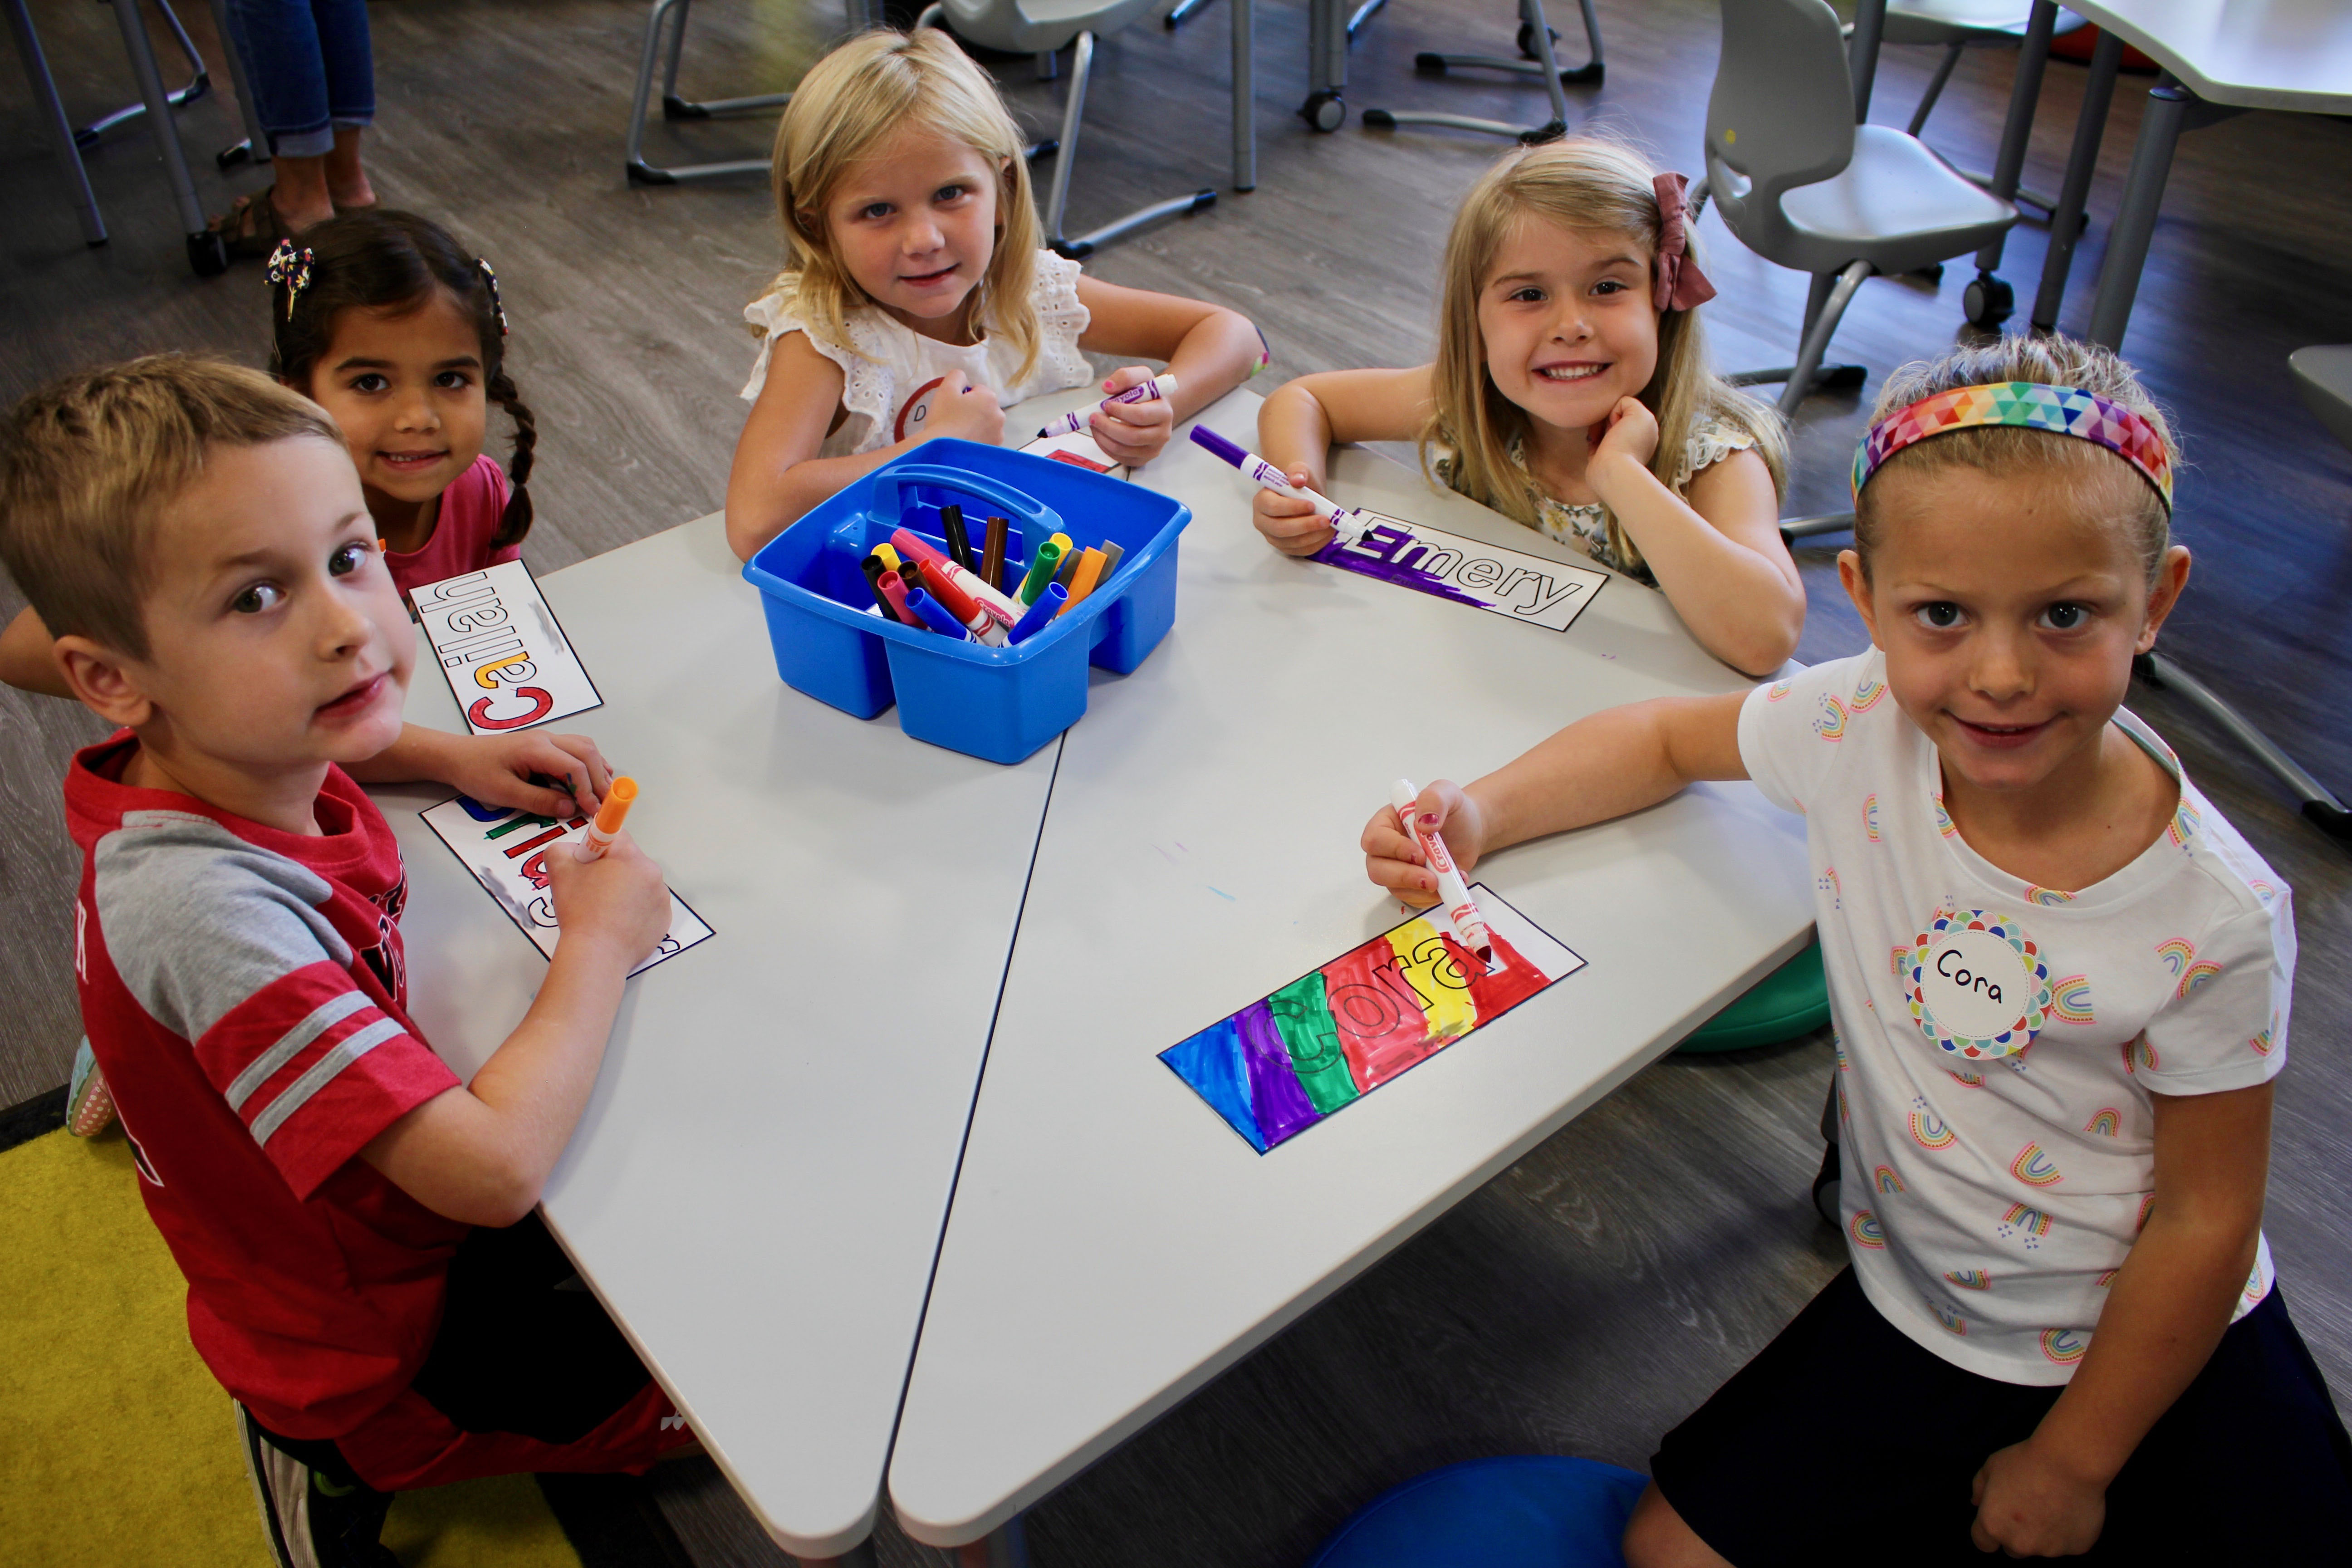 Five kindergarteners sitting at a table coloring their nametags